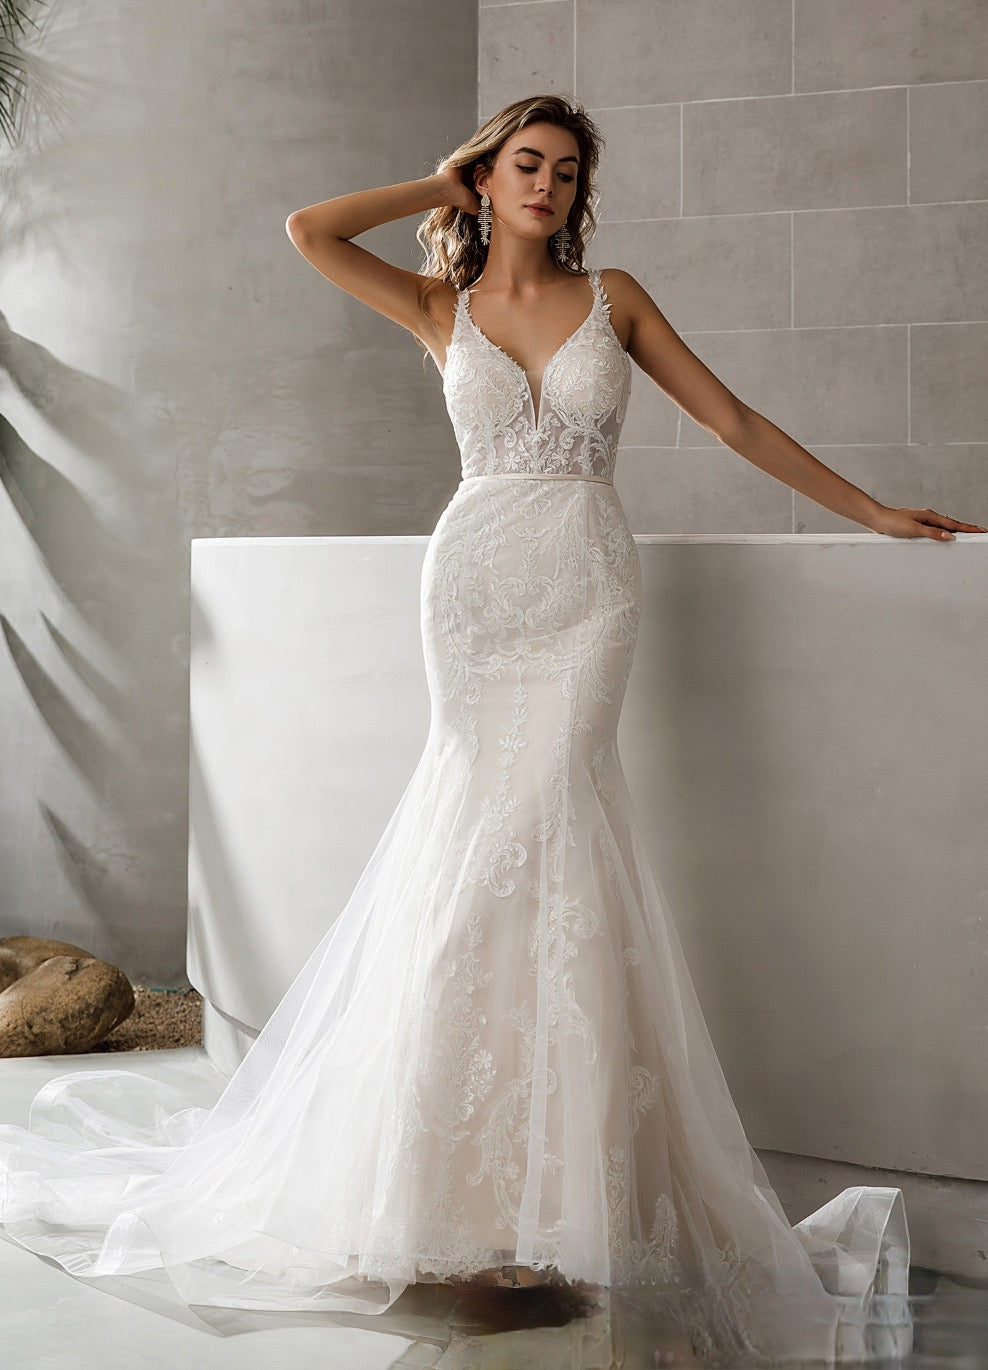 Geometric Lace Fit and Flare Bridal Gown With Sheer Train – TulleLux Bridal  Crowns & Accessories